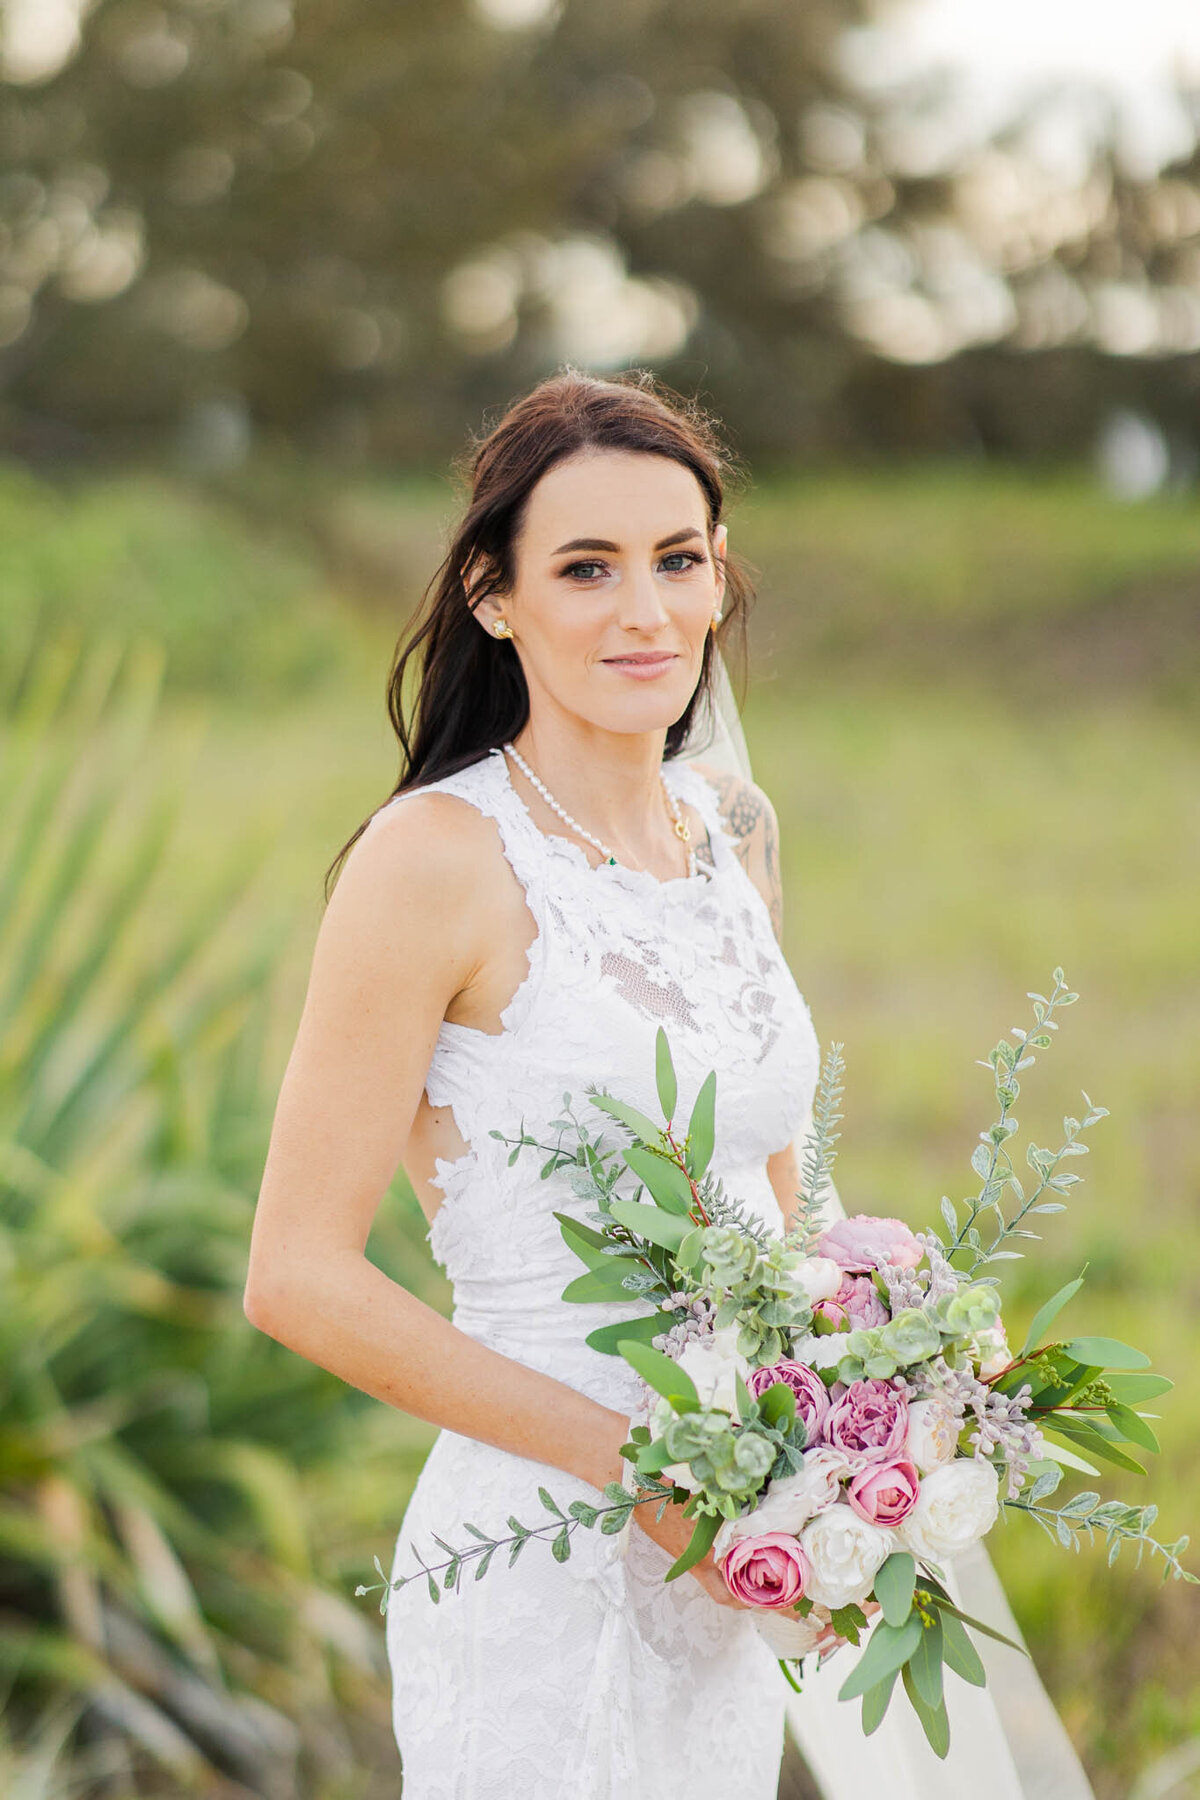 bride give a soft smile towards wedding photographer alyce holzy.